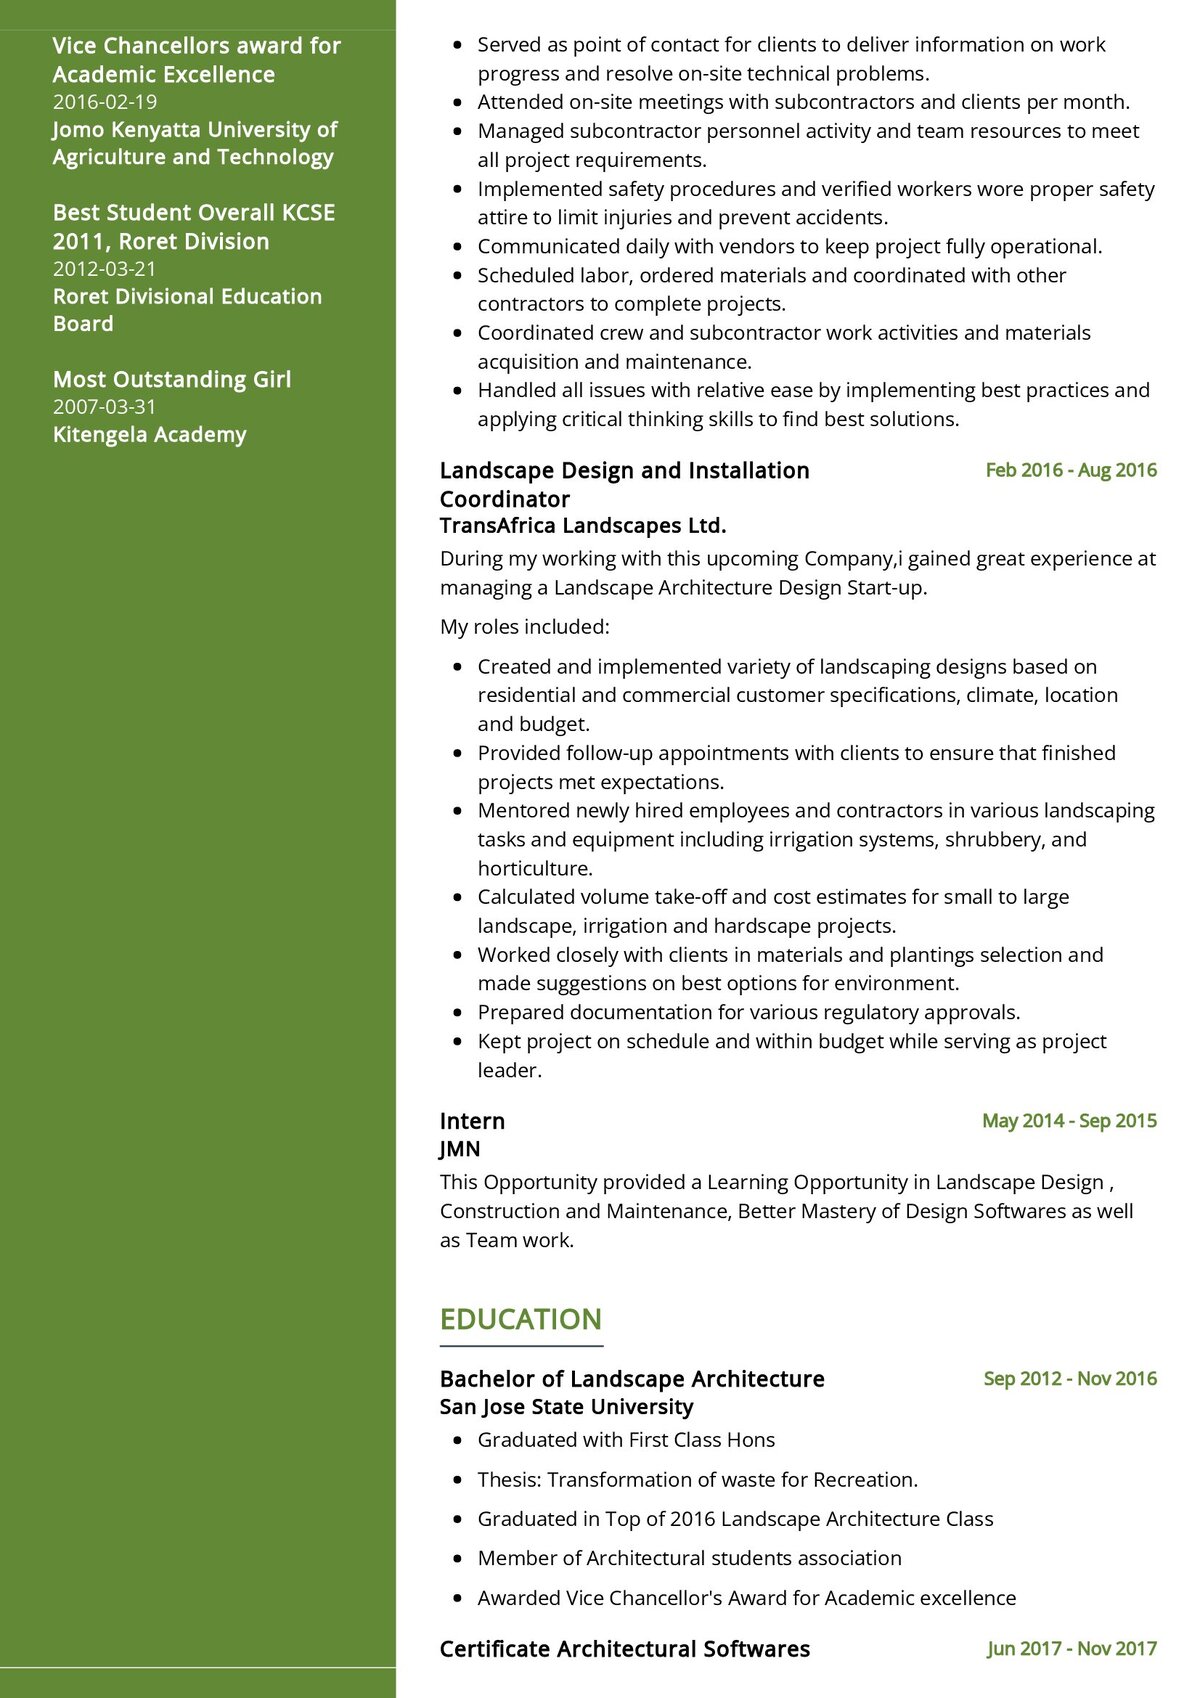 resume summary examples for landscaping